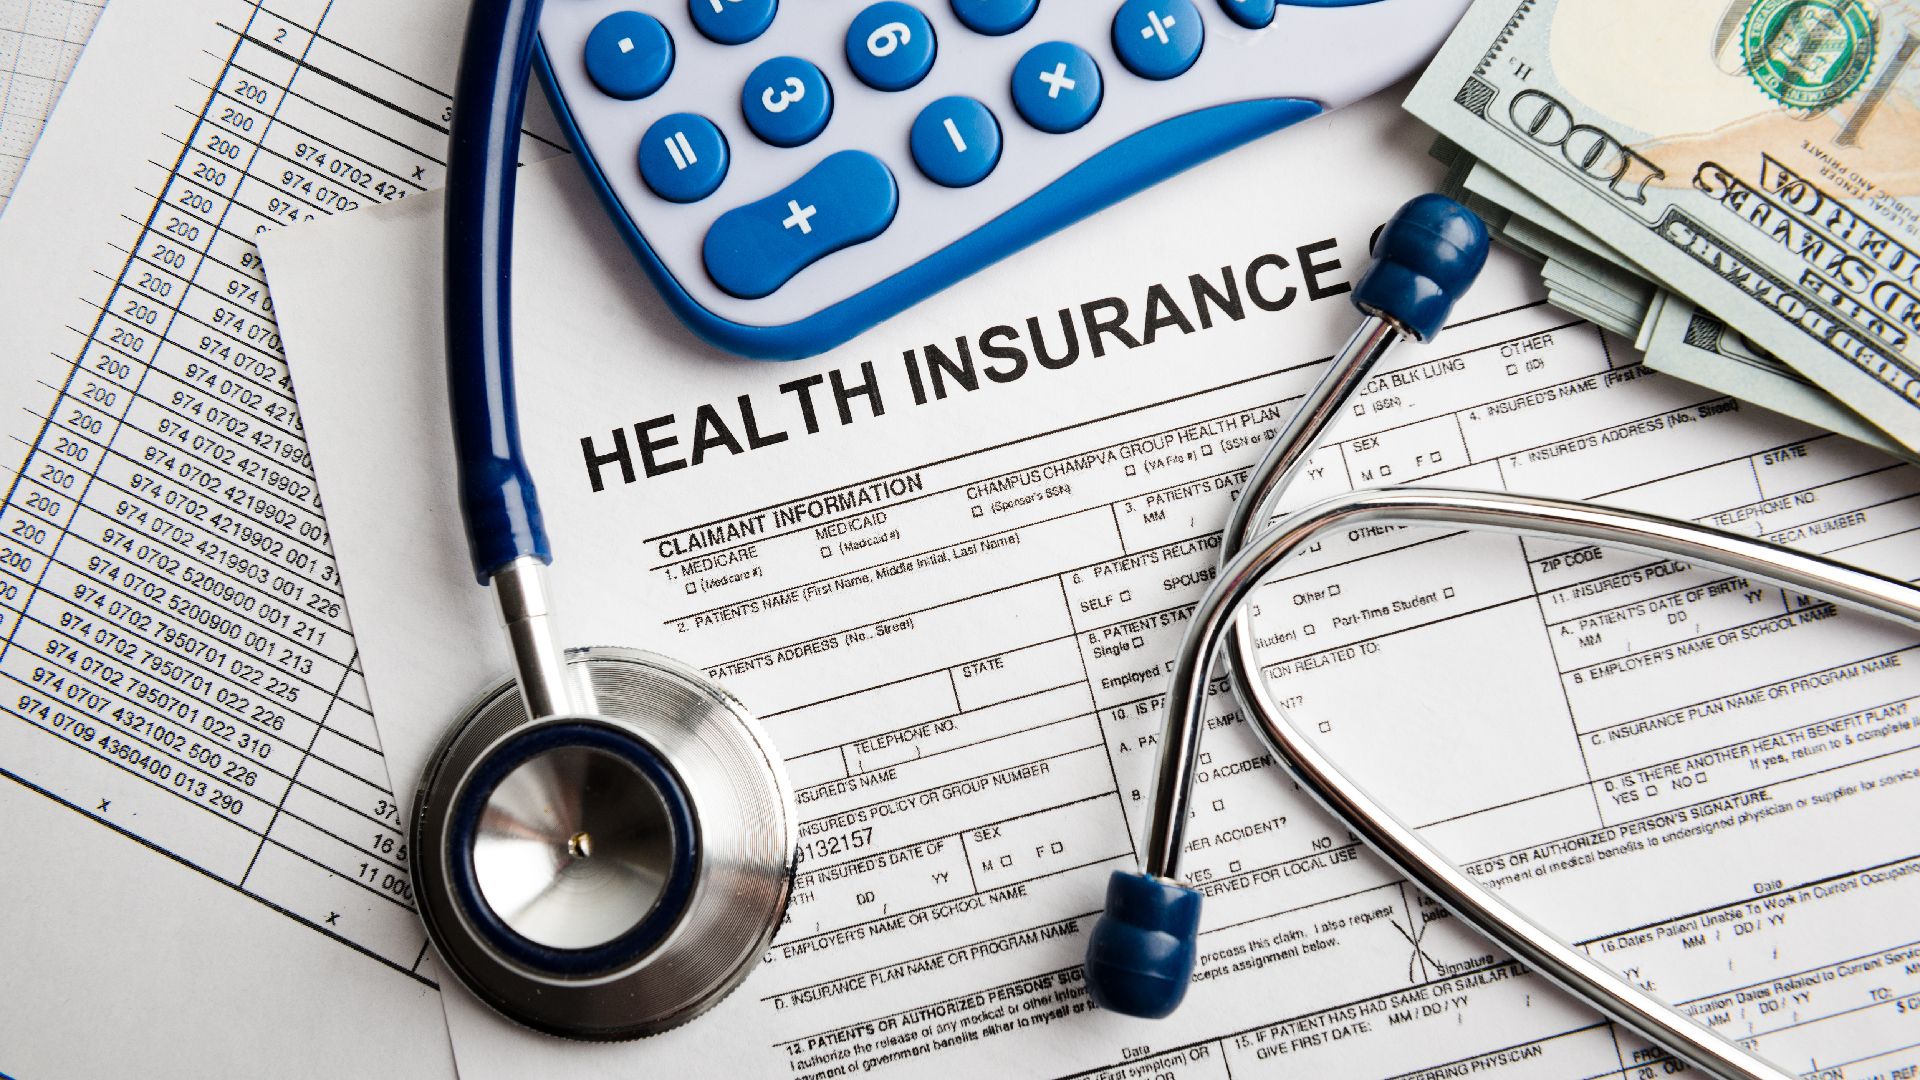 What is Health Insurance?